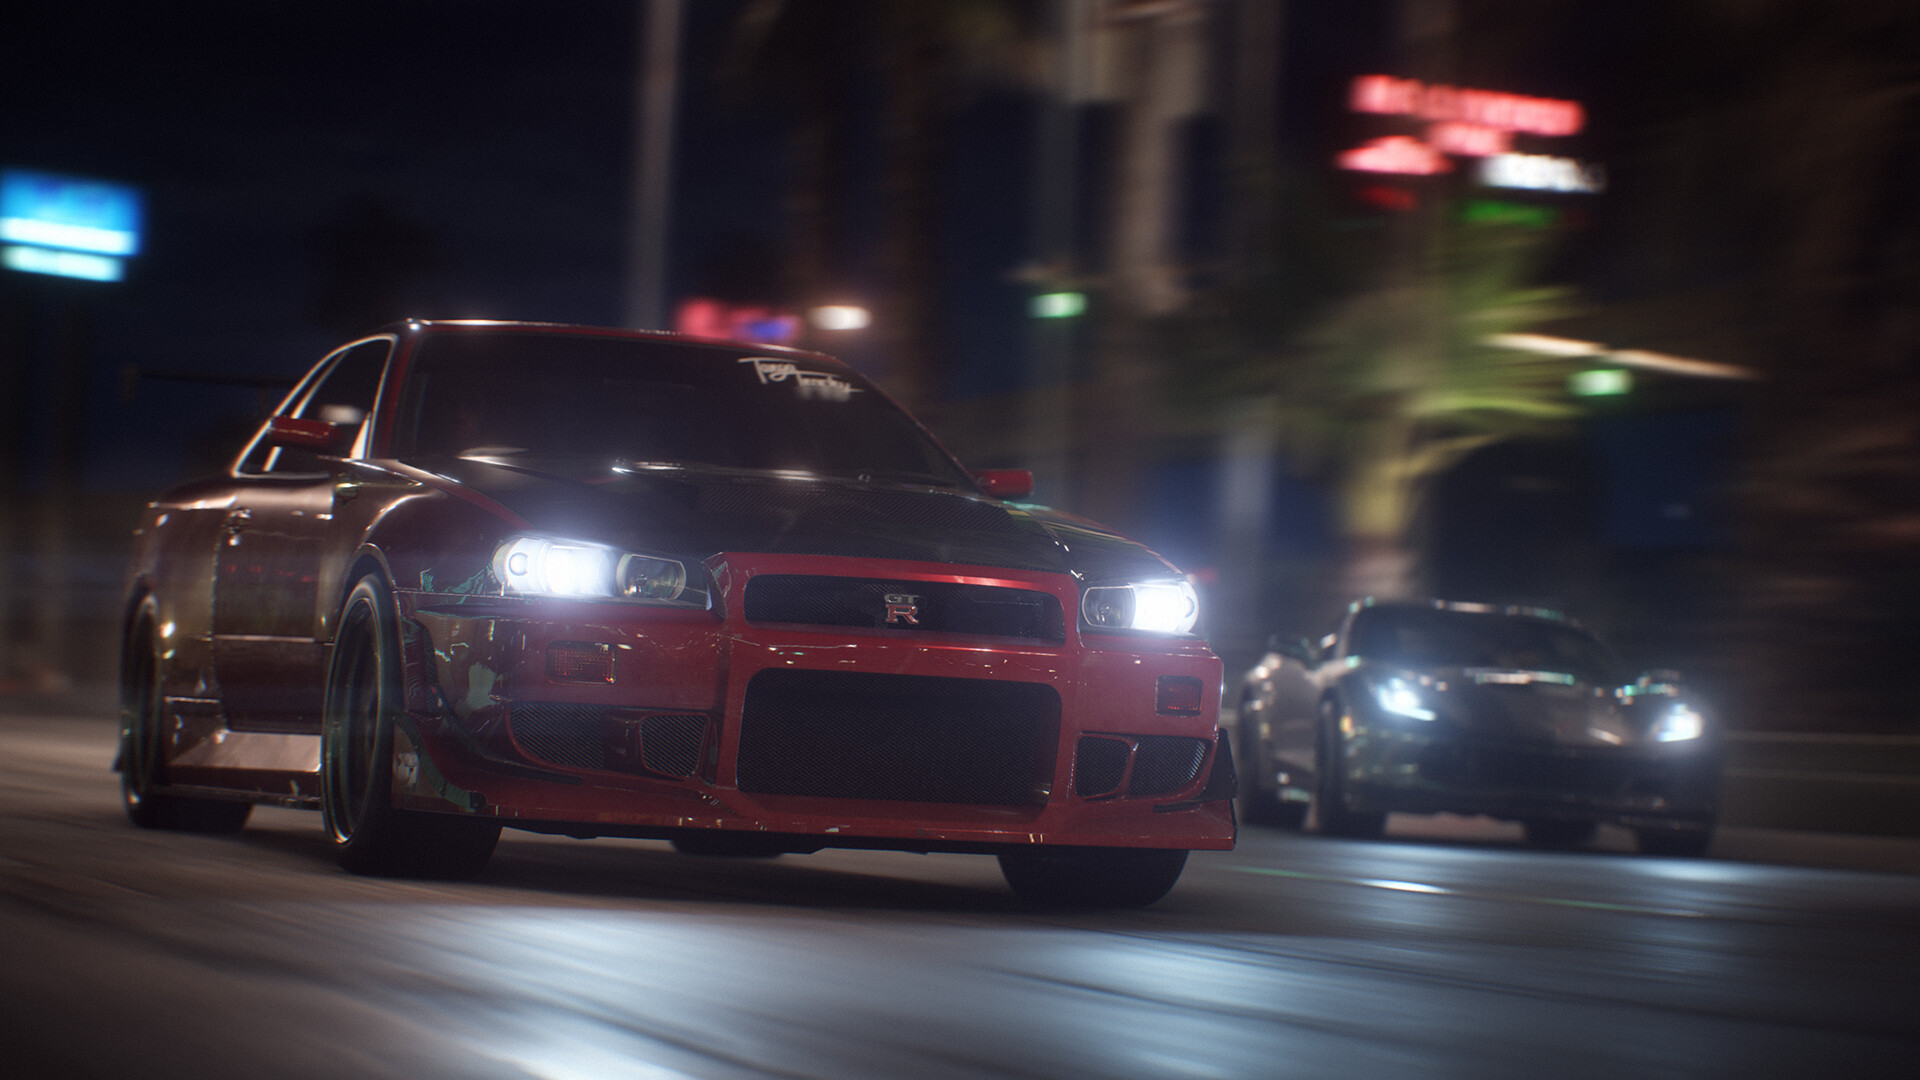 Need For Speed Payback System Requirements - Can I Run It